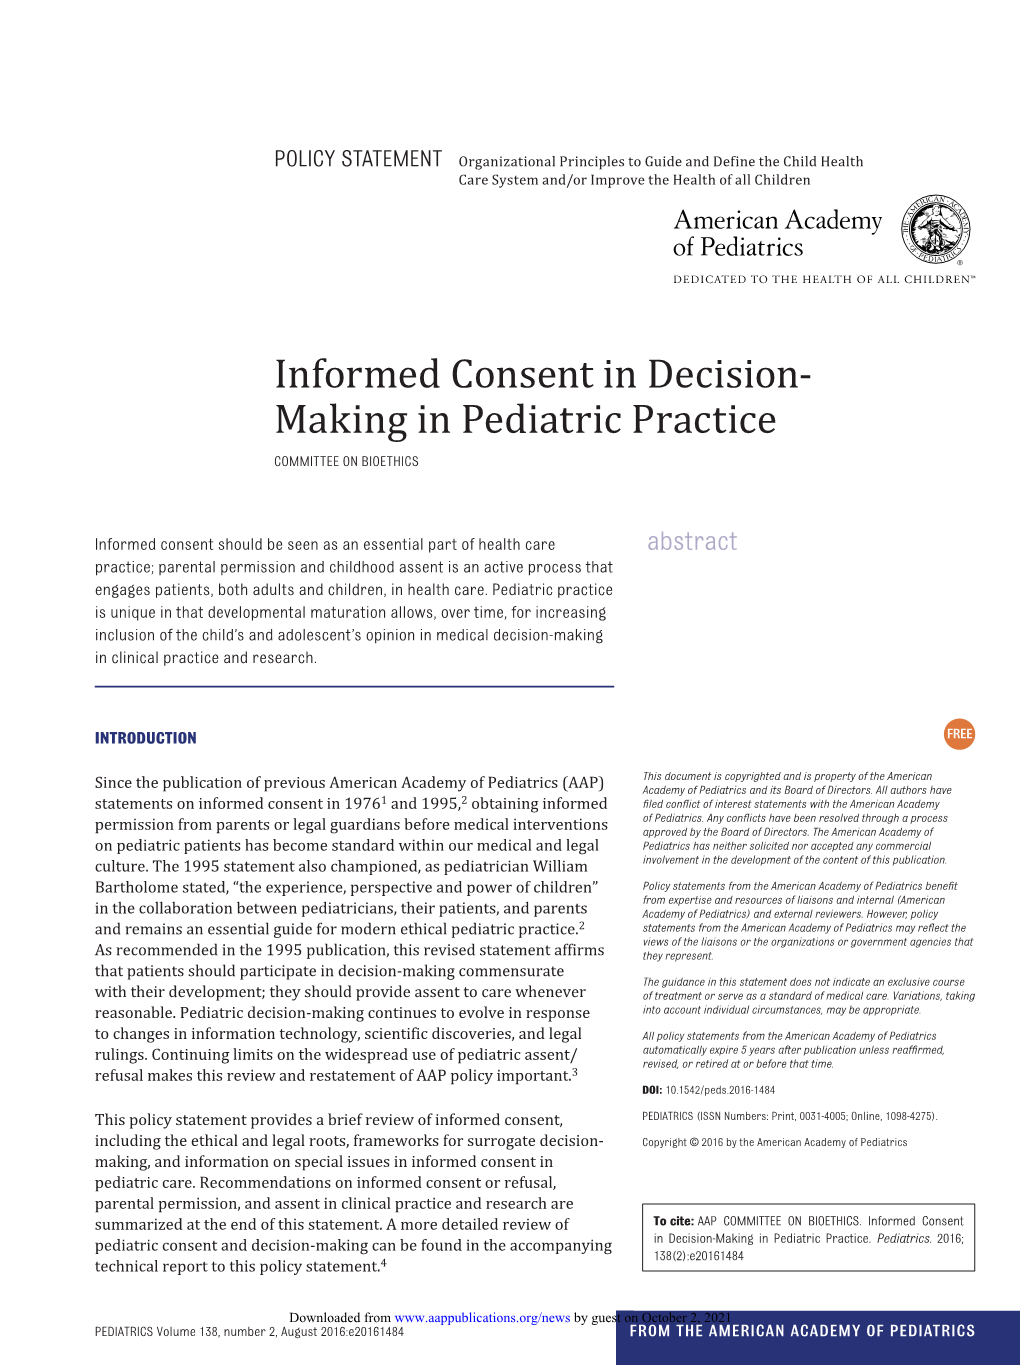 Informed Consent in Decision-Making in Pediatric Practice